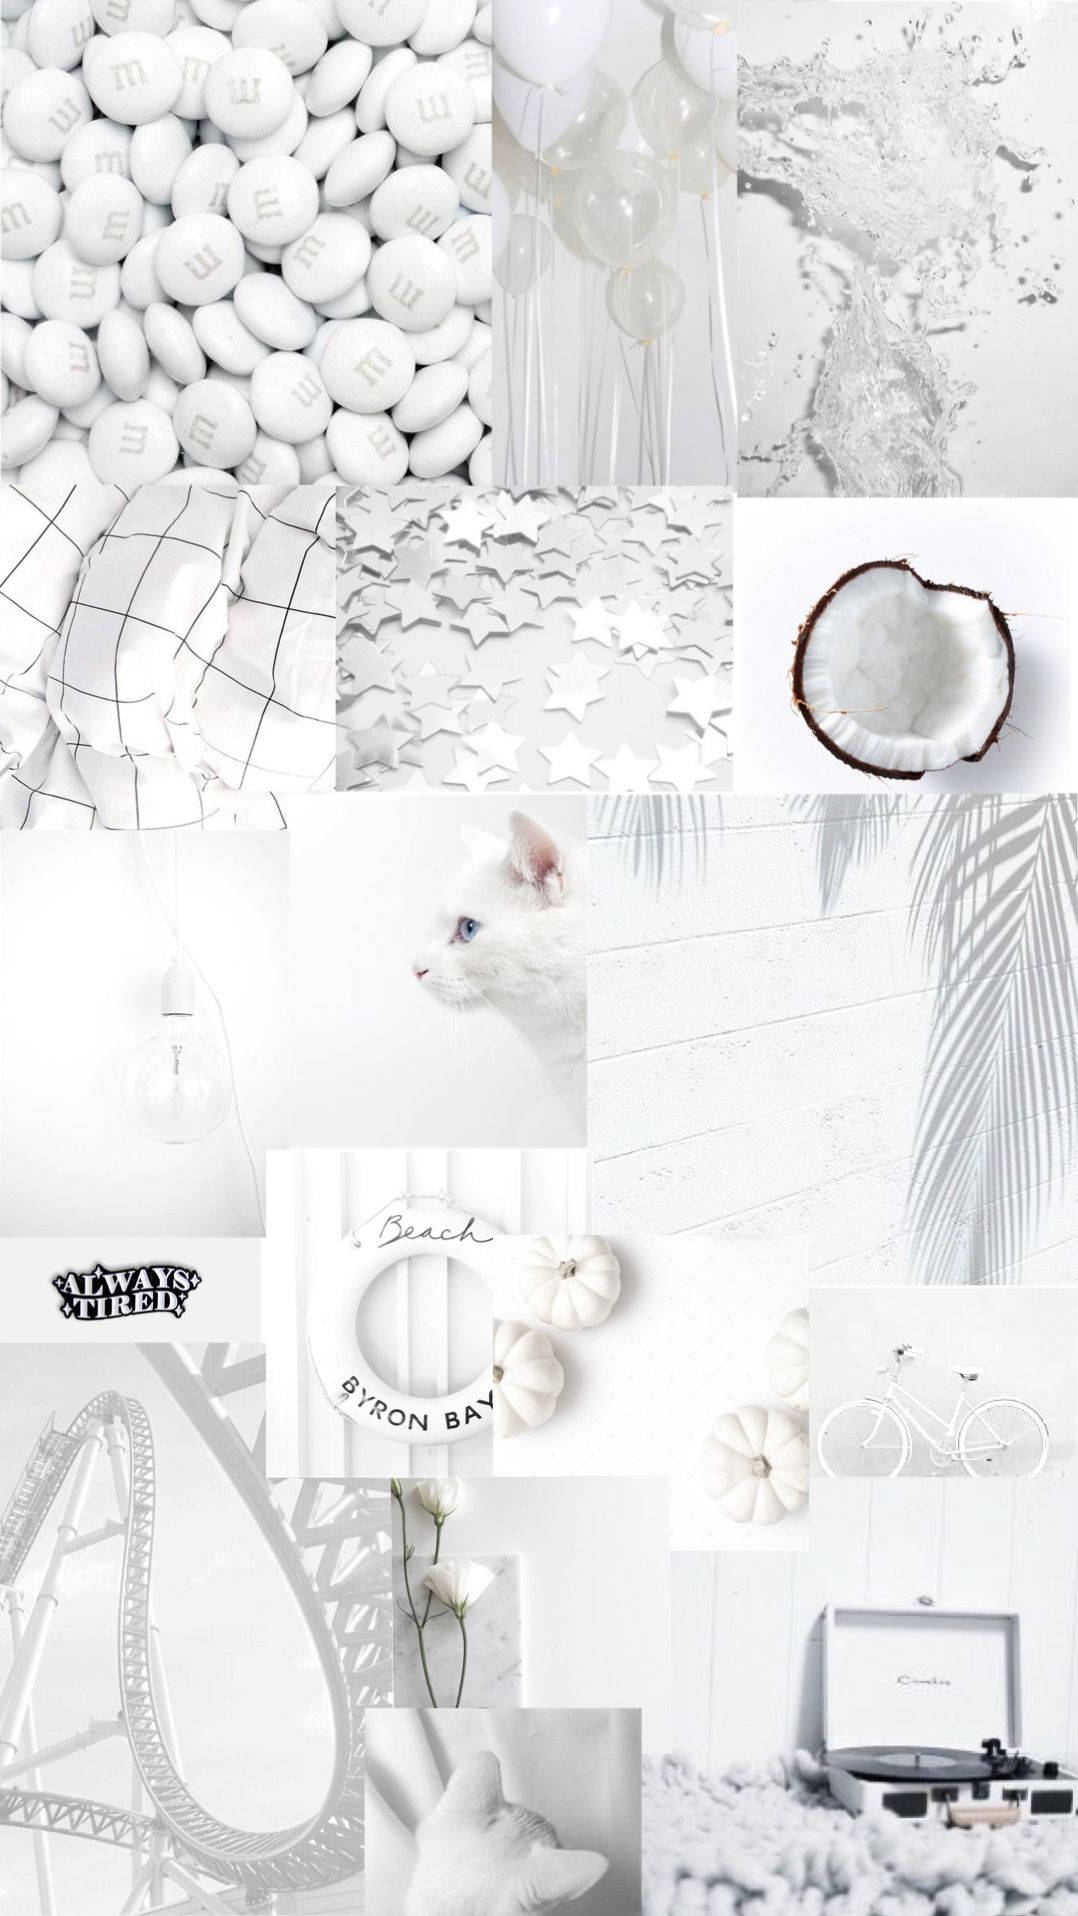 Download Plain White Aesthetic Collage Wallpaper